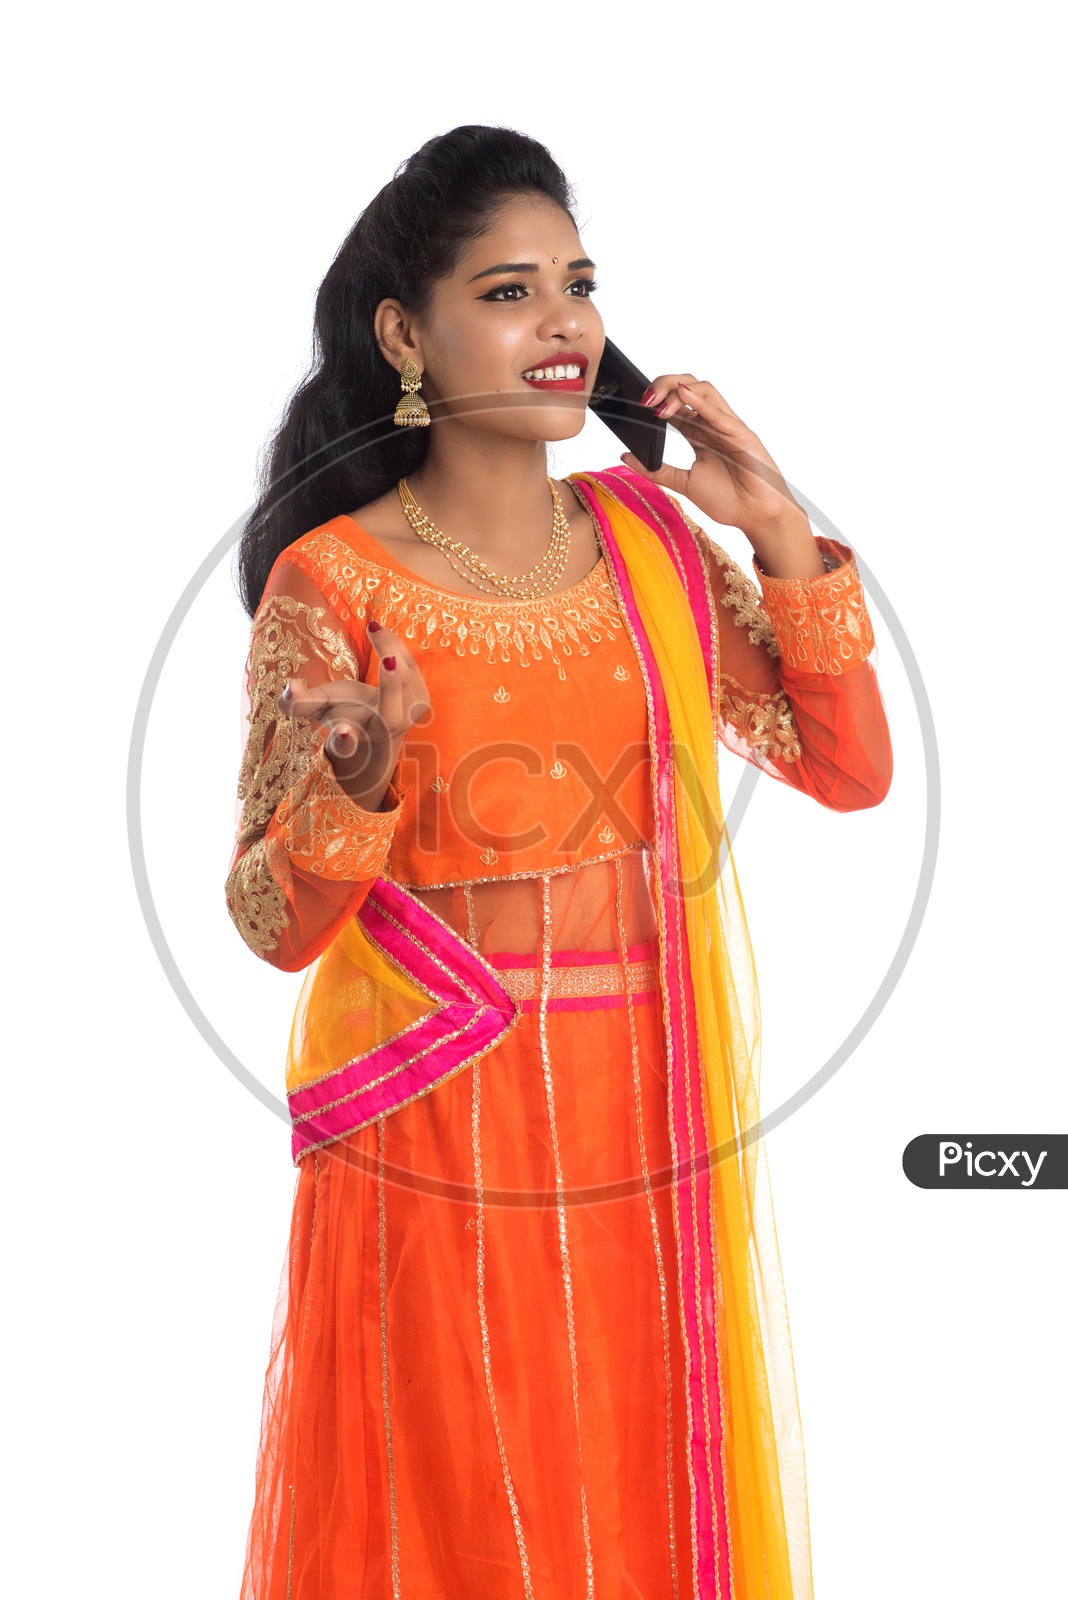 A young traditional Indian woman talking on a mobile phone or smart phone